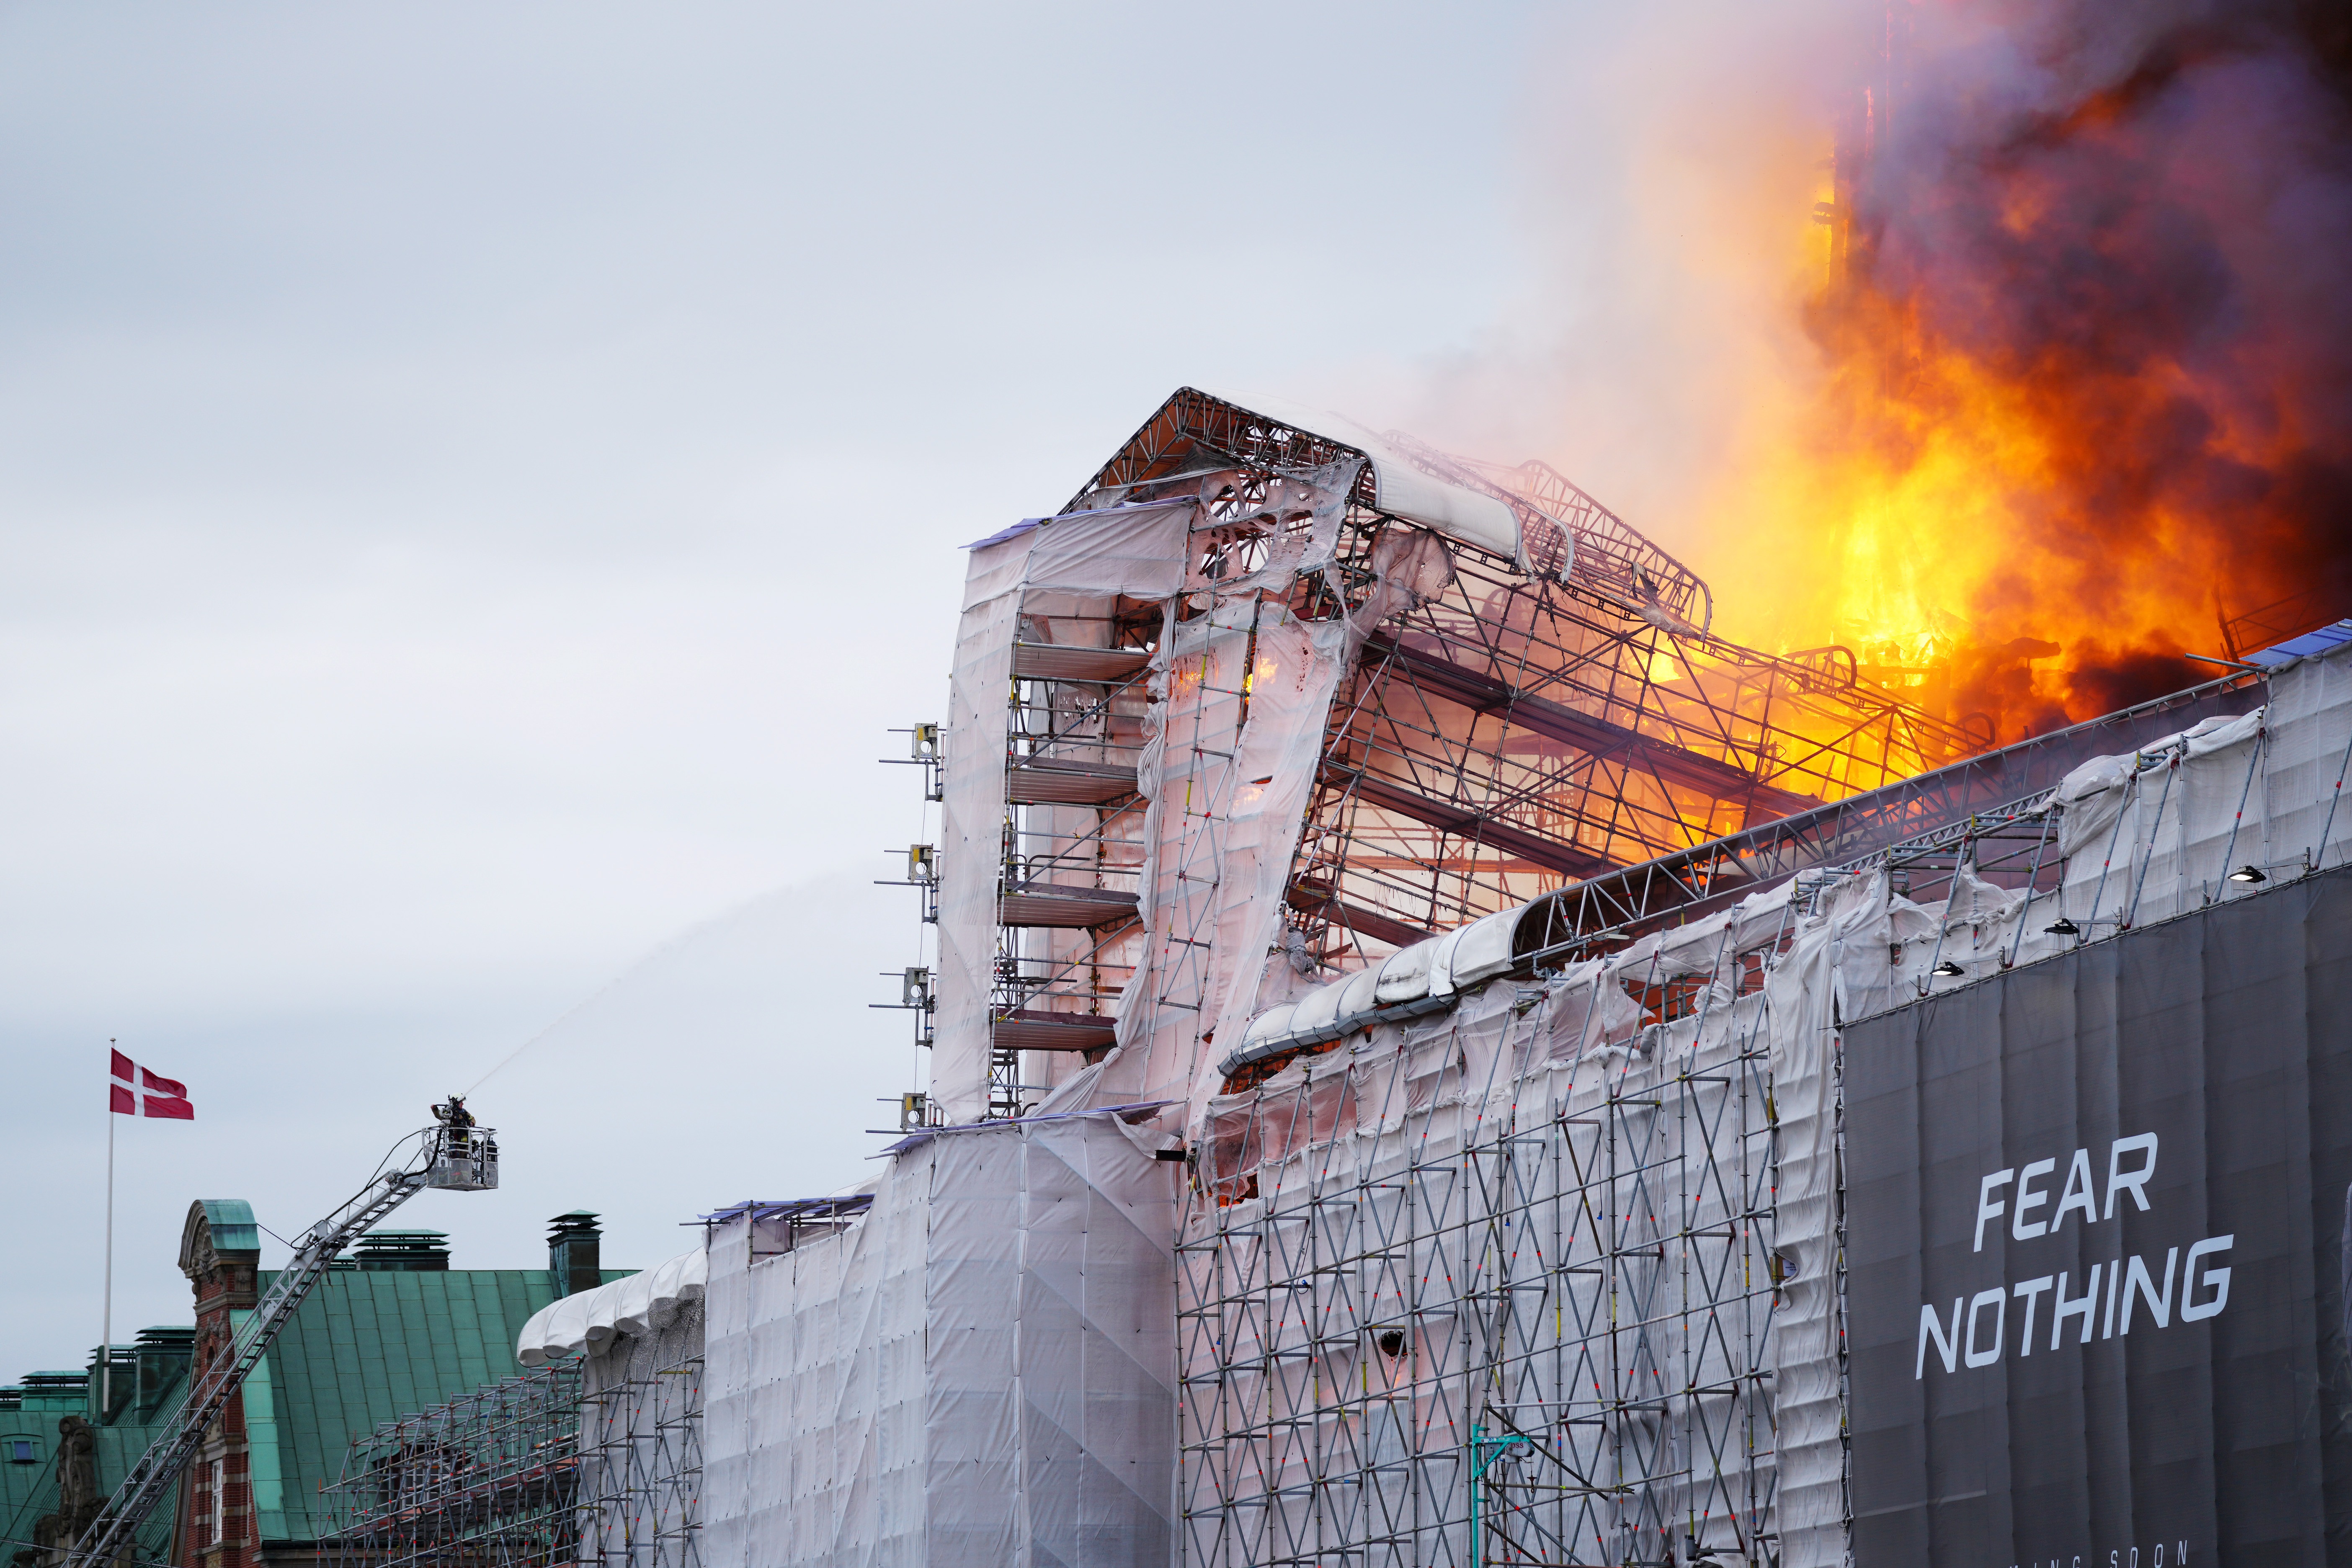 The fire that broke out on Tuesday toppled down the building's iconic spire.